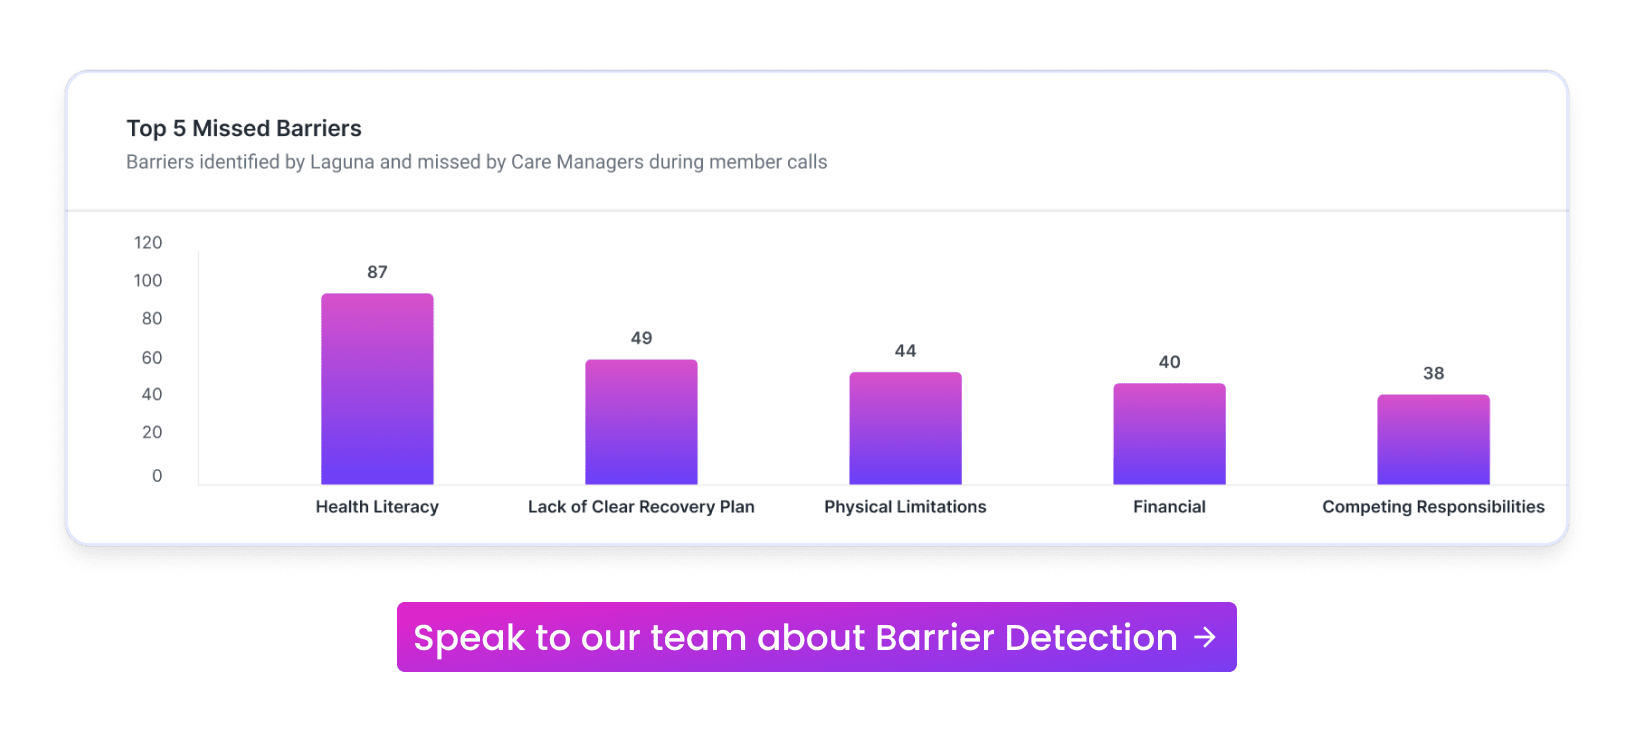 Chart showing top 5 missed barriers